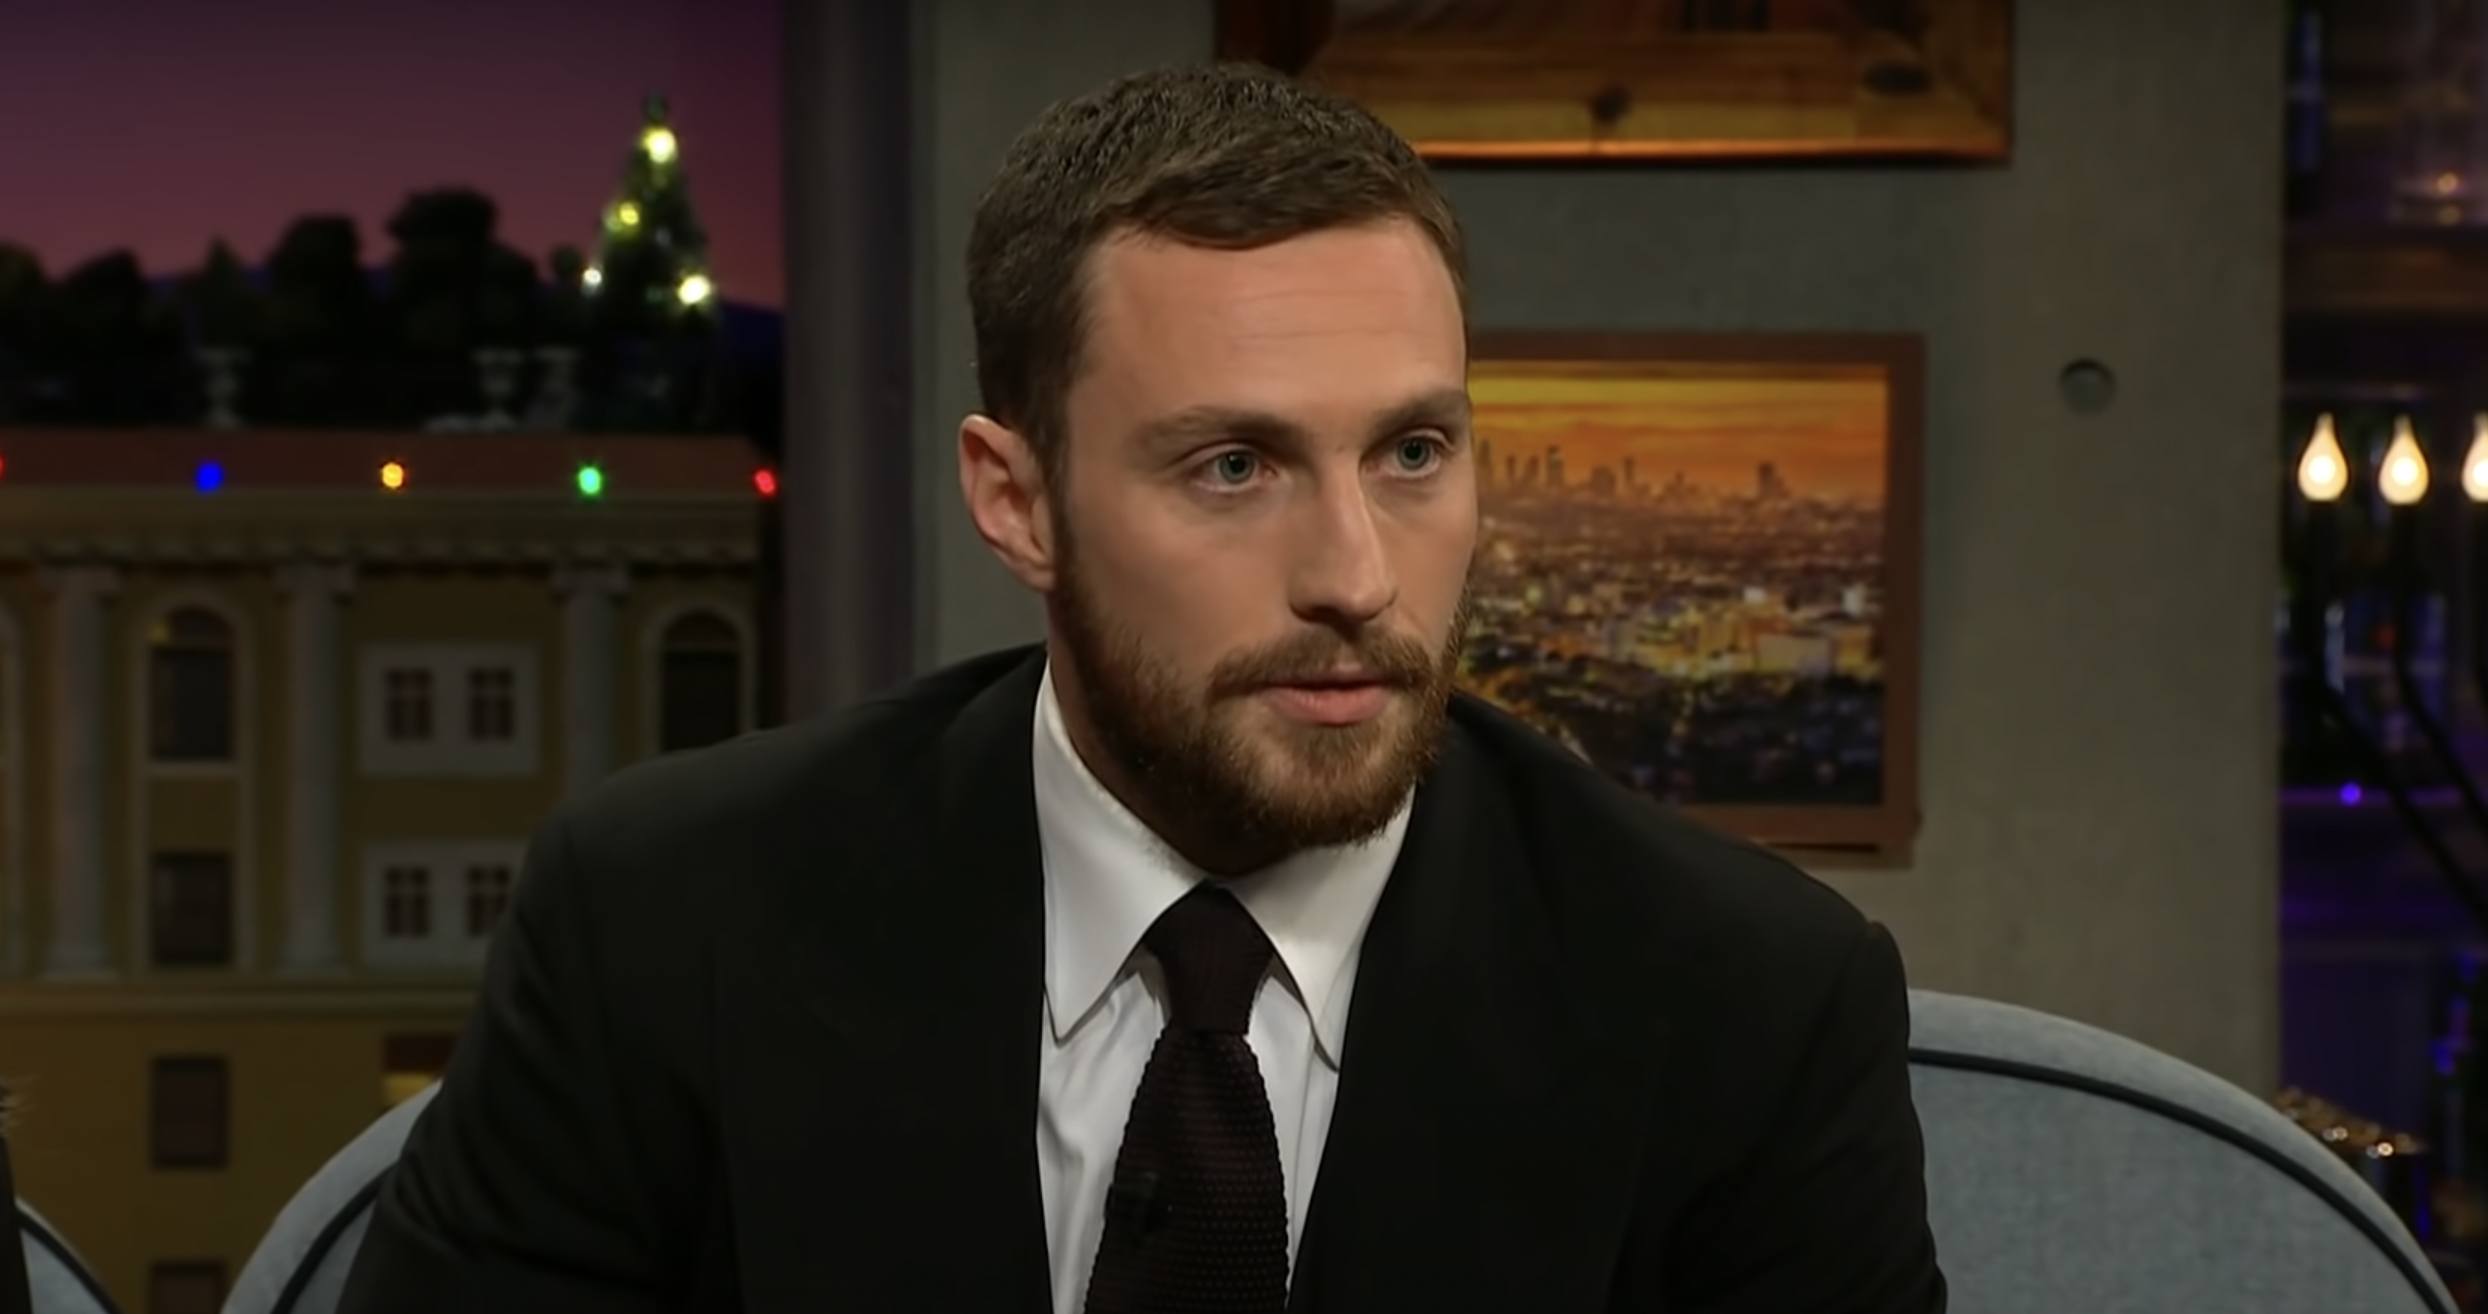 James Bond Fans have Same Concern about Aaron Taylor-Johnson Being Cast to Play 007